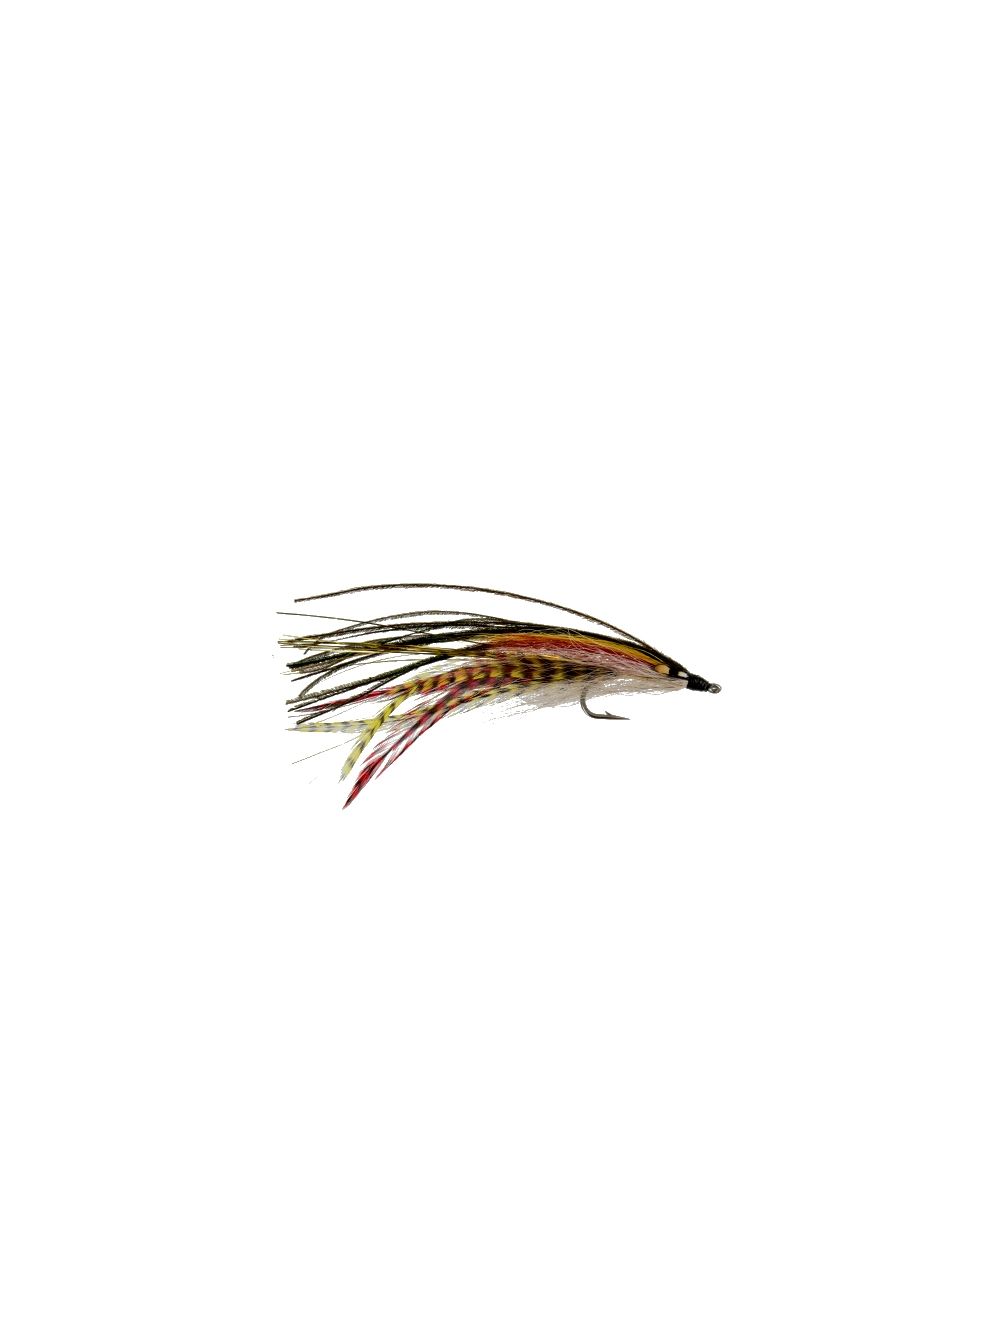 https://eadn-wc02-1020161.nxedge.io/cdn/media/catalog/product/cache/32b930e20bfef0c9badd7ee253a86131/s/t/striper-snack-red-and-yellow-fly-fishing-flies-saltwater_1.jpg